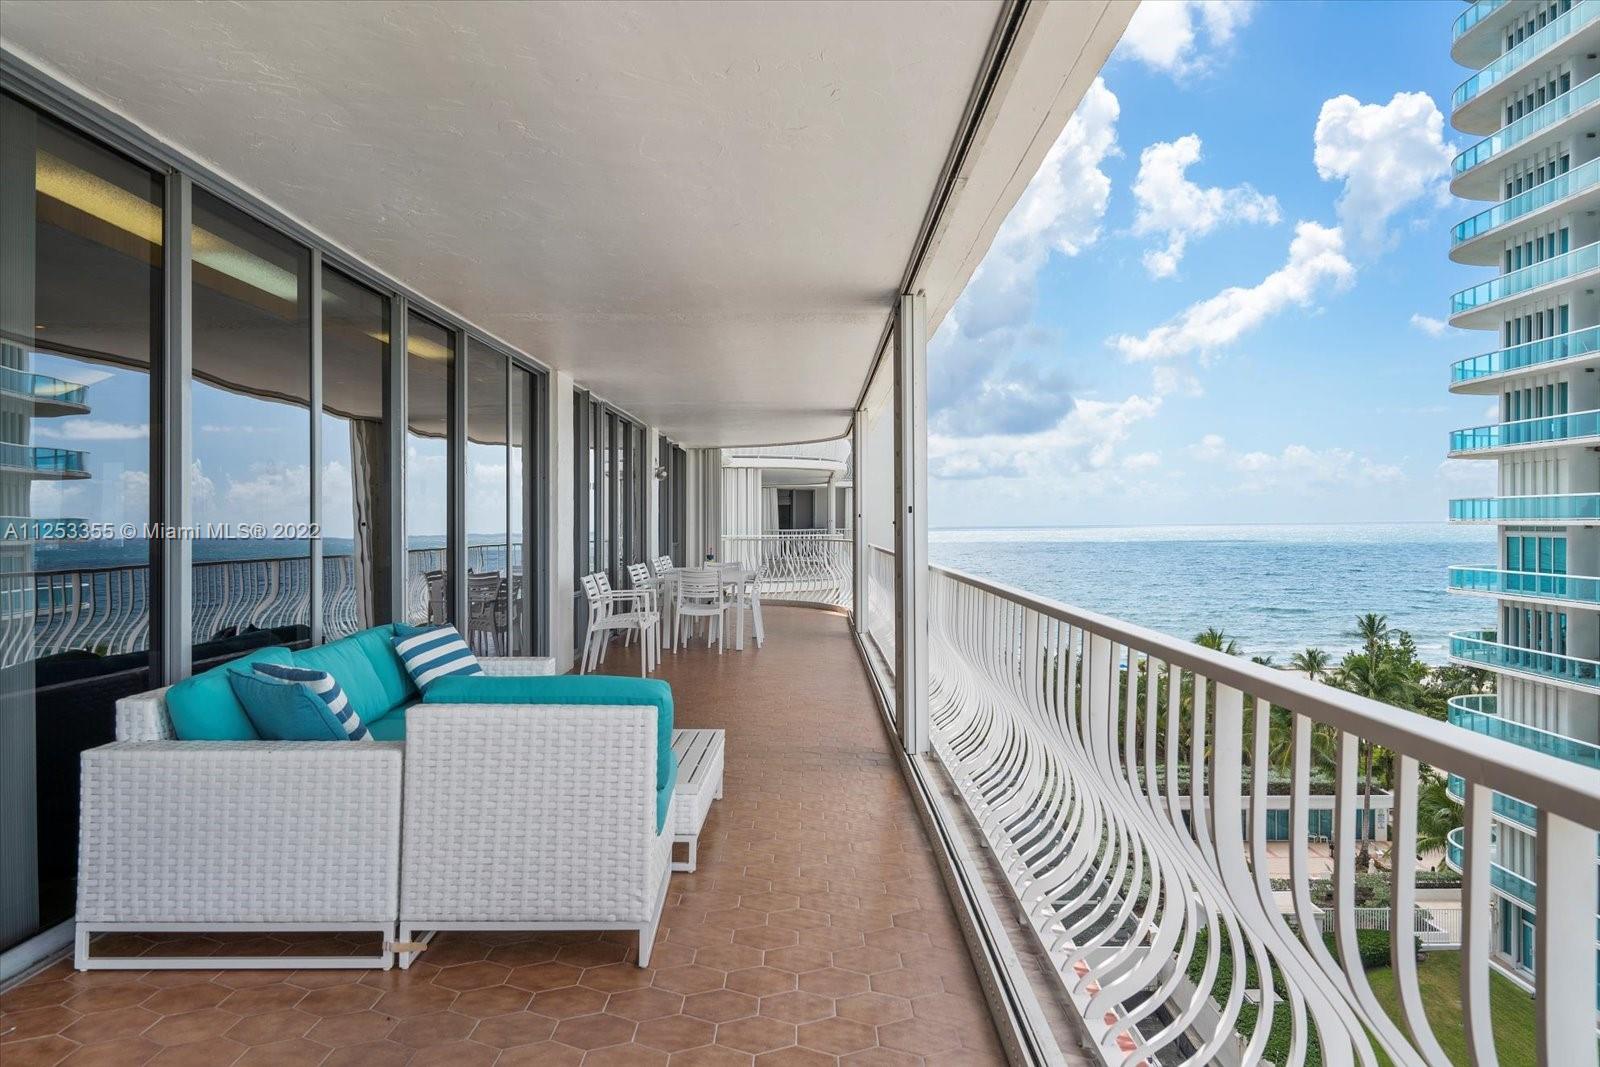 Priced to Sell! Highly desired beachfront building in the heart of luxurious Bal Harbour. 3 bedrooms & 3.5 bathrooms, 3,340 SF, and a massive balcony with both Ocean and City views. This is an Interior Designer's dream; the perfect unit for someone to add their personal touch. Enormous master suite featuring his/her bathrooms, 2 walk-in closets & sitting area. Currently has a KOSHER Kitchen. This prestigious building was recently renovated by world-renowned architect Kobi Karp. Enjoy ultra-luxurious beachfront living with 24-hour valet, state-of-the-art gym, on-site restaurant, pool and beach service, social room, movie theater, hot tub, and more. Walking distance to Bal Harbour Shops, CVS, Publix, and all the Restaurants on Harding Ave.